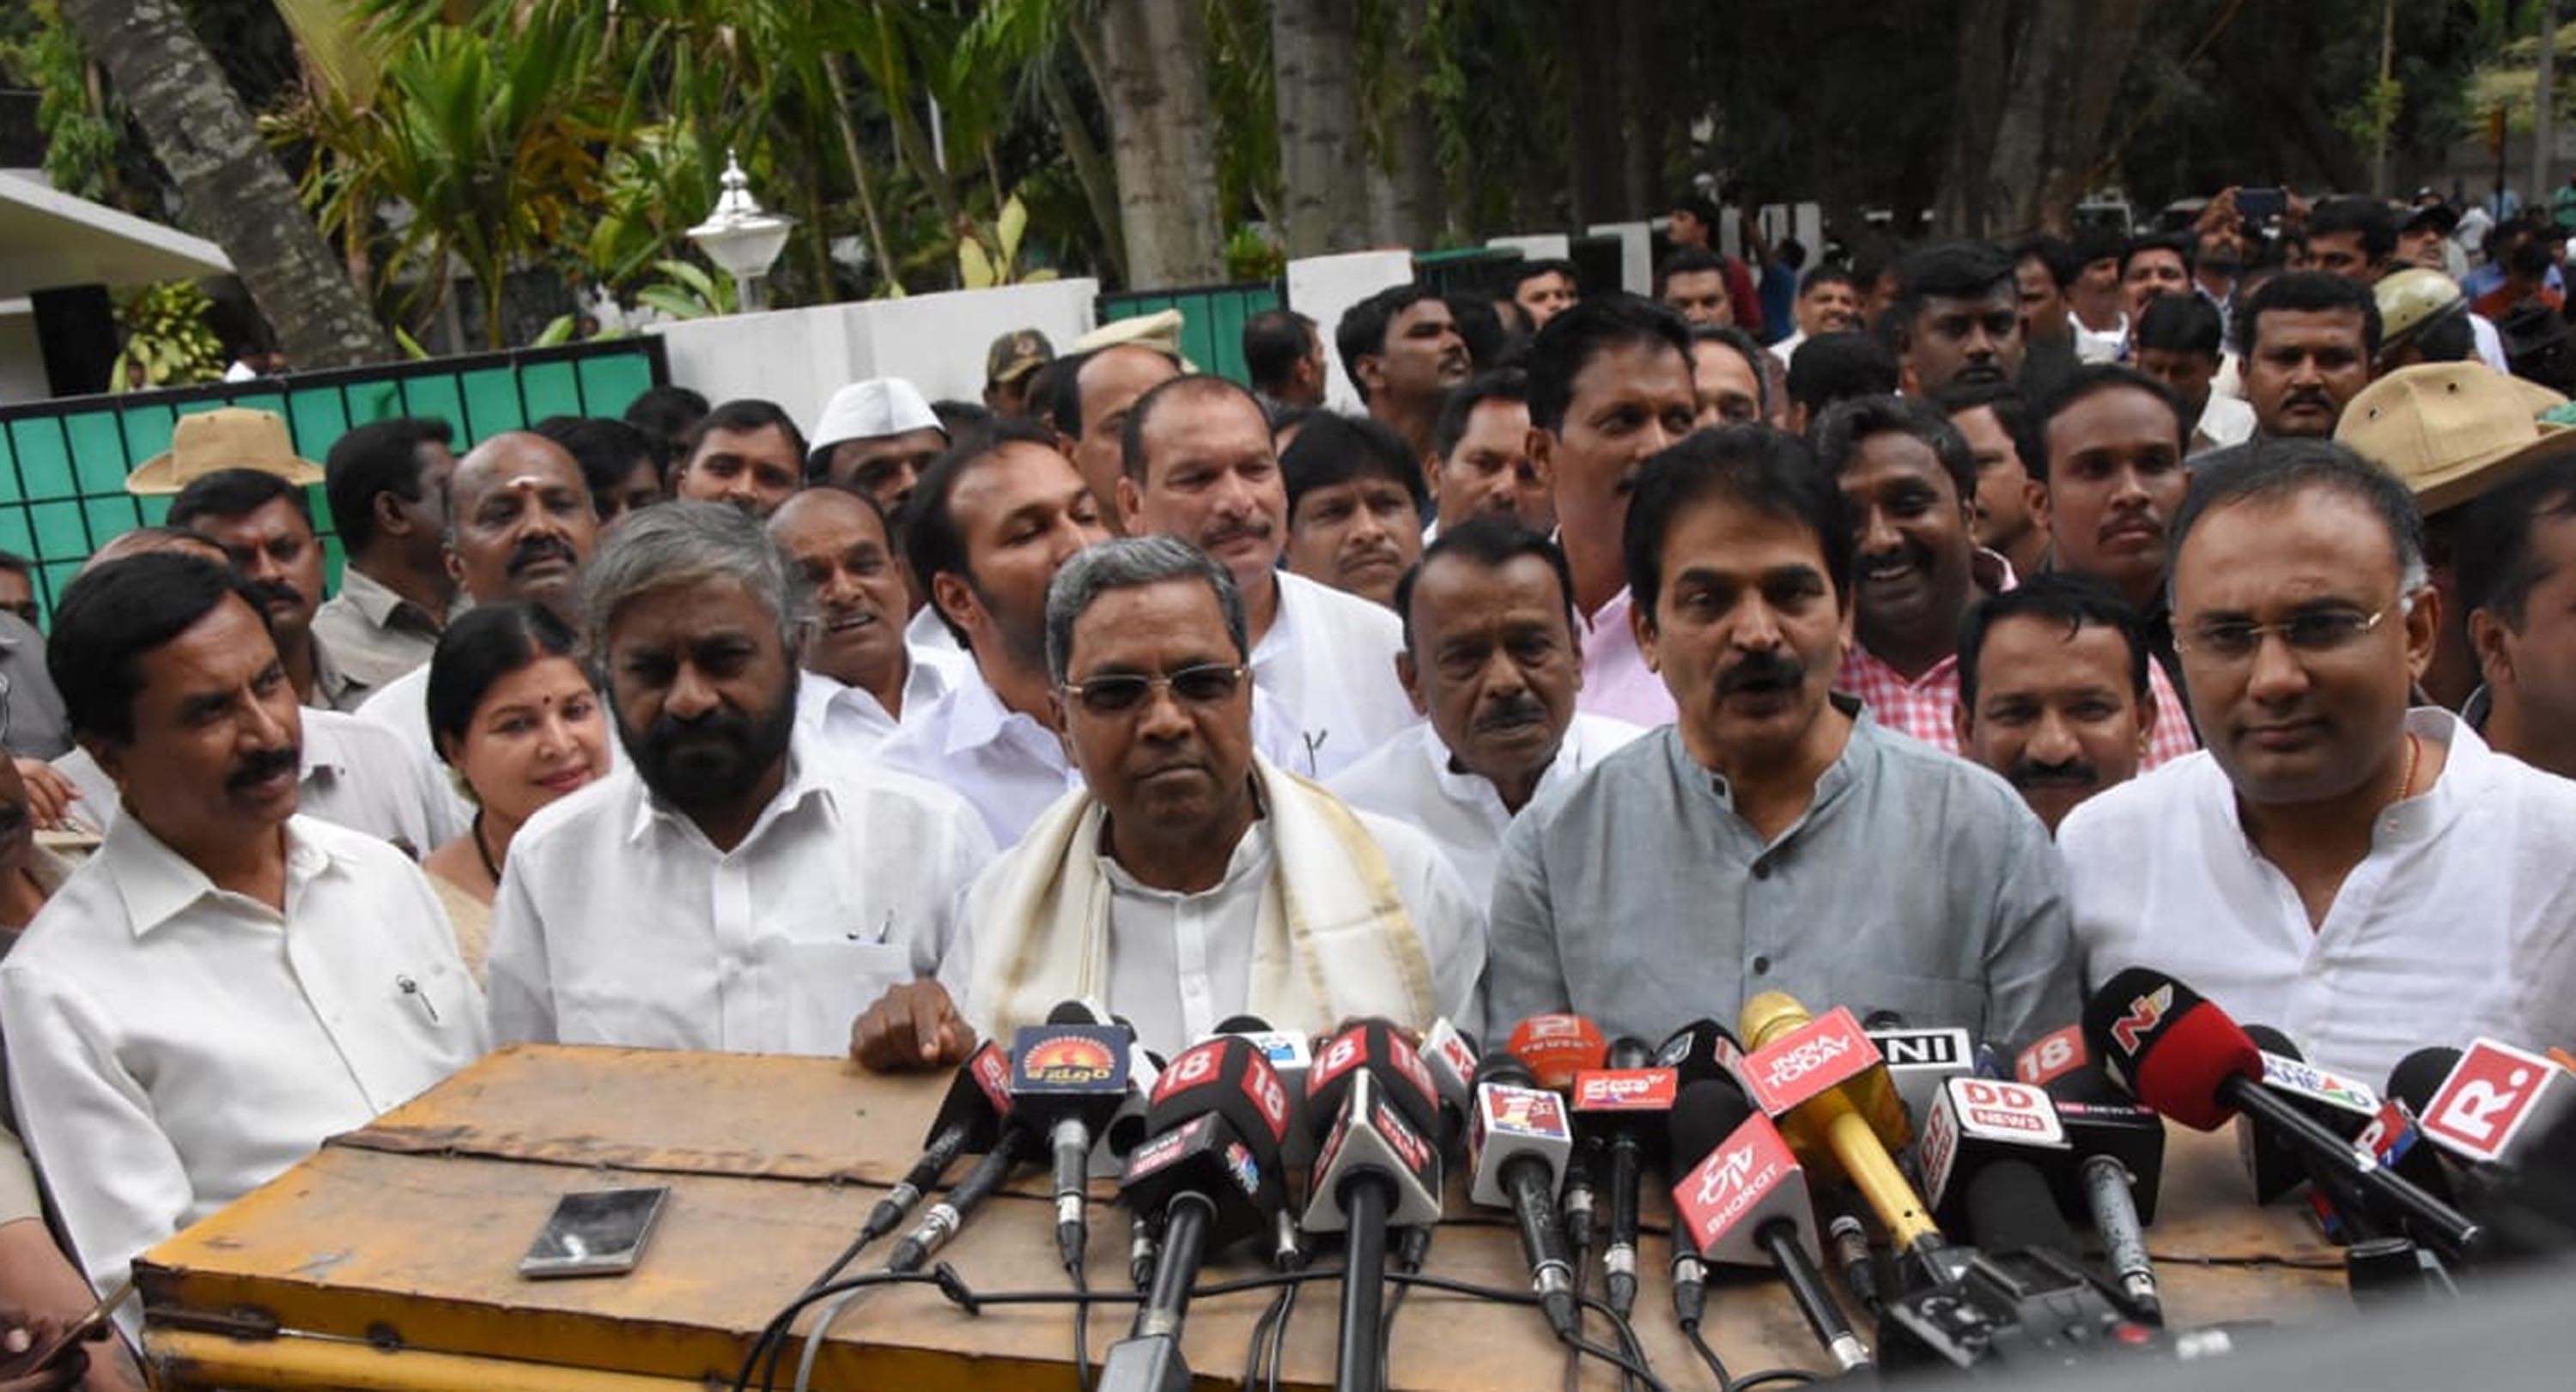 AICC General Secretary and Karnataka Incharge, K C Venugopal, KPCC President, Dinesh Gundu Rao, Former Chief Minister and CLP leader, Siddaramaiah, Dy Chief Minister, G Parmeshawar and senior leaders addressing a media persons announce all Congress Minister resigantation of H D Kumarswamy ministry in Bengaluru on Monday.